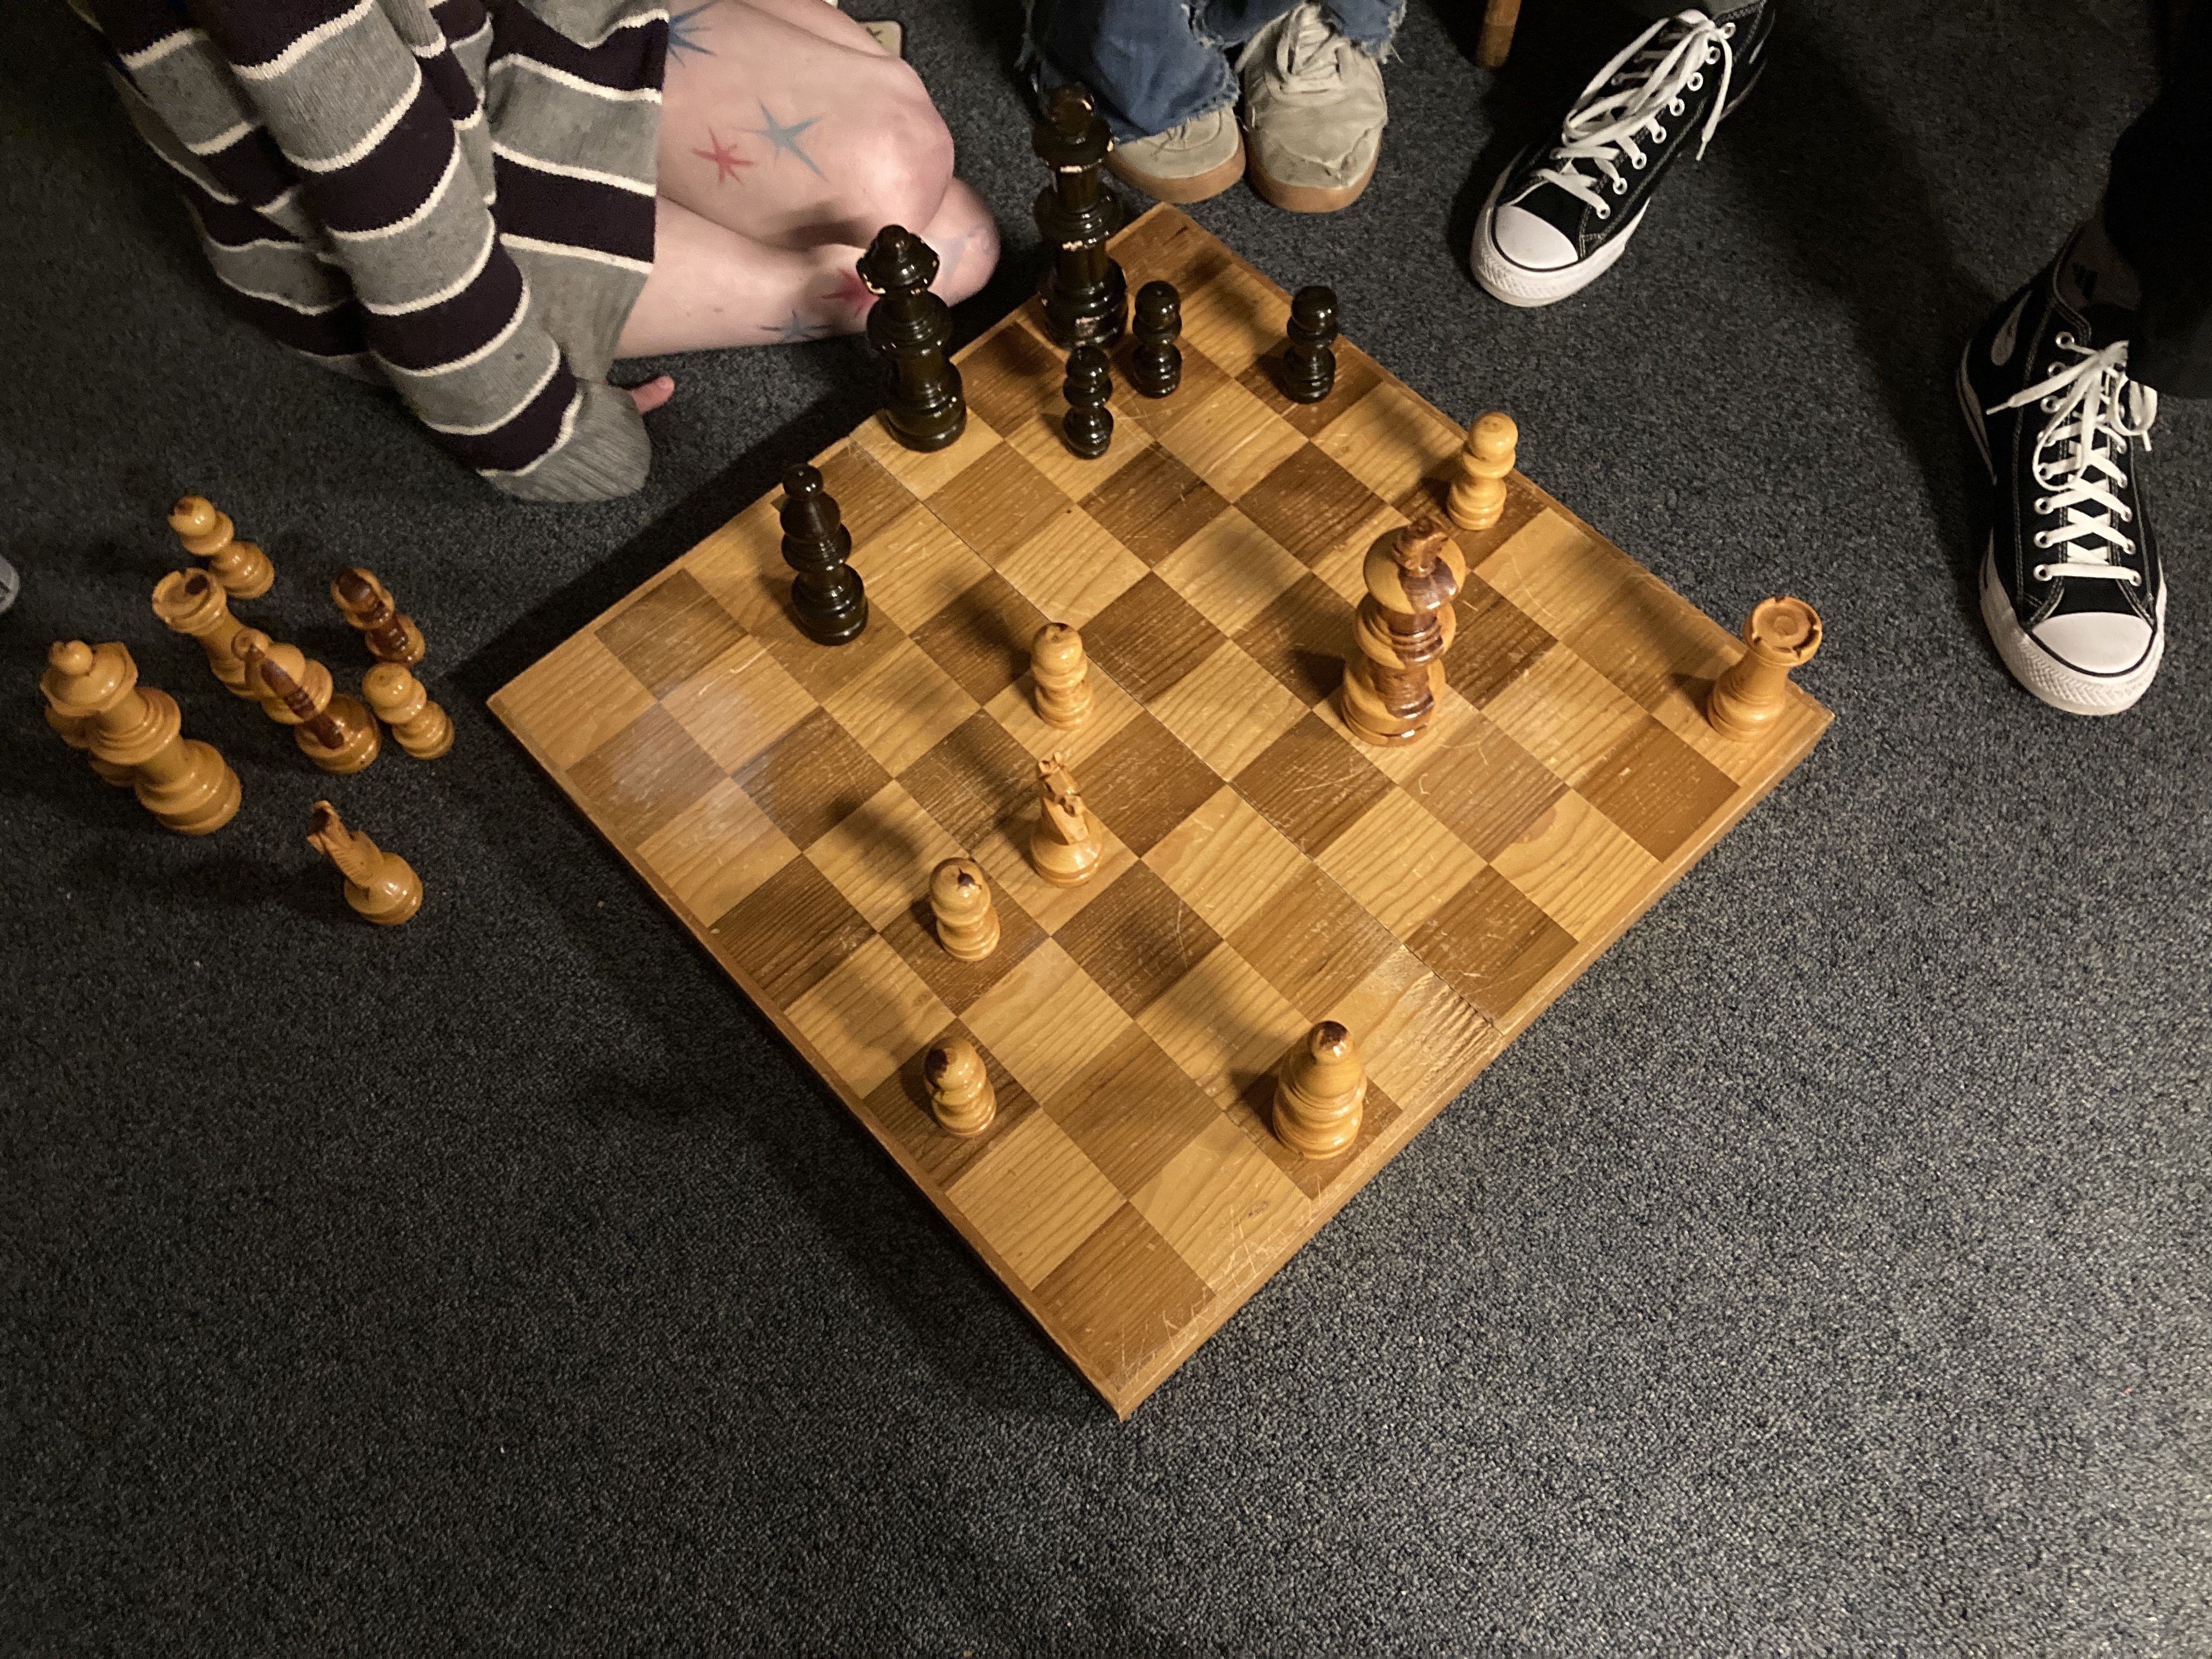 The knees and feet of three people around an oversized wooden chess board on a grey carpeted floor.